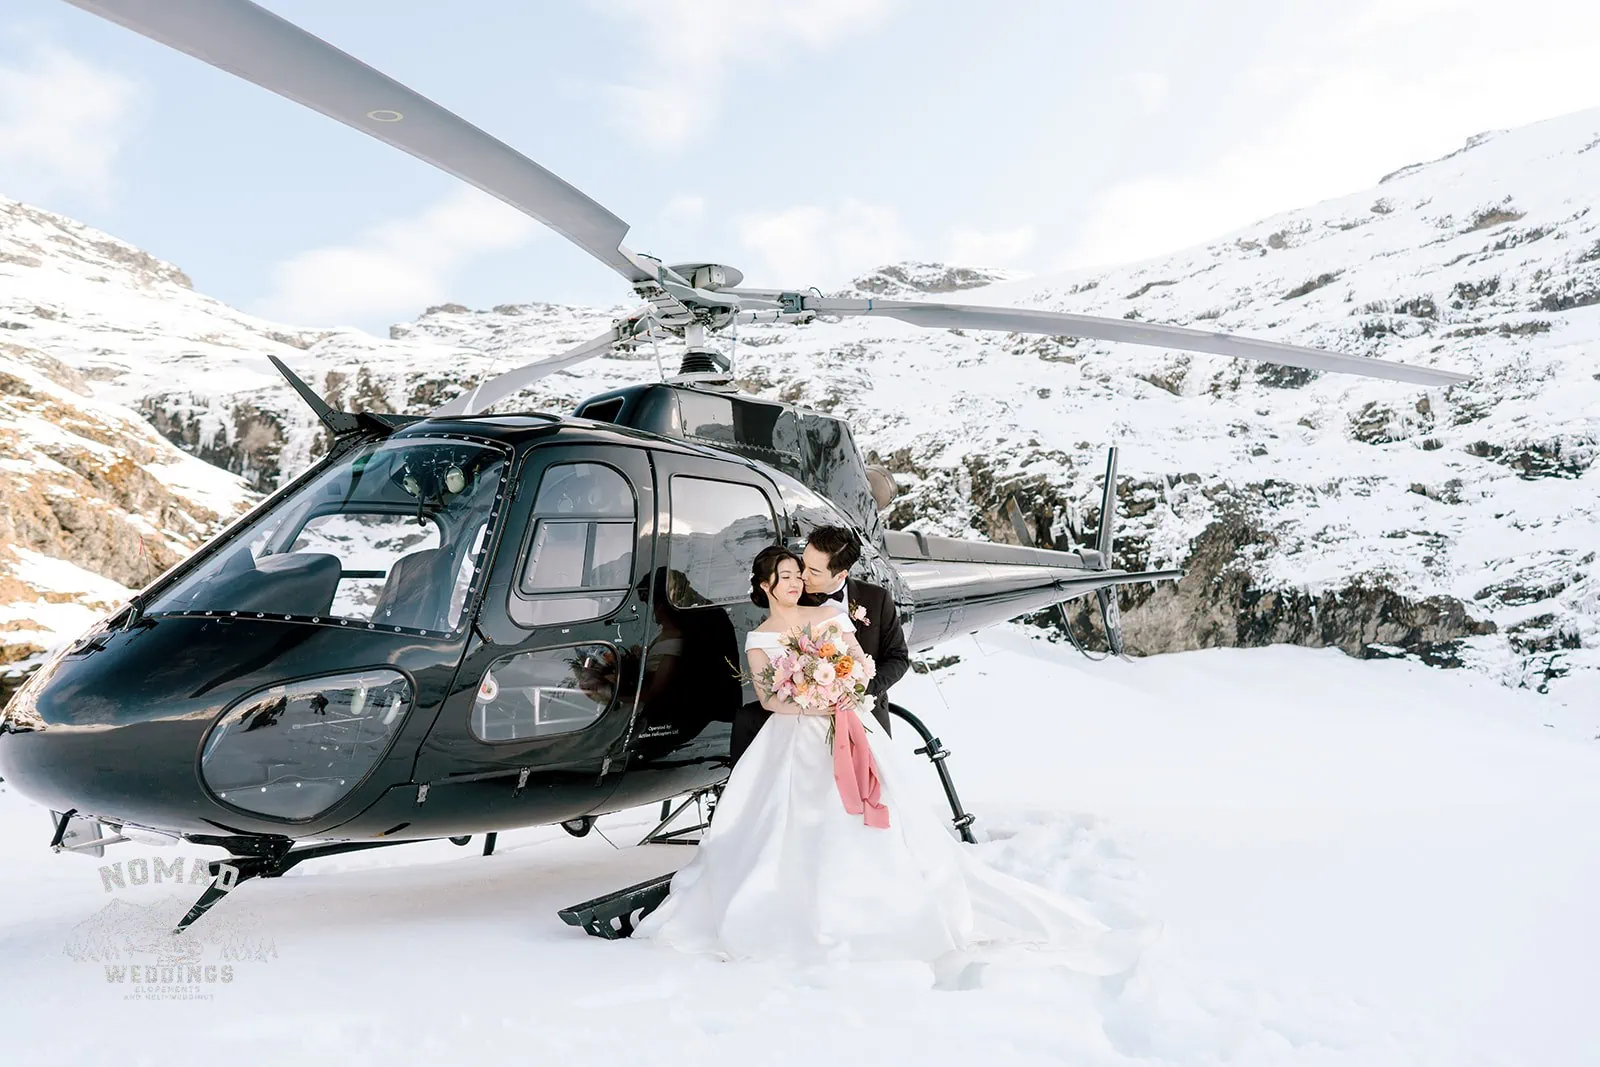 Queenstown New Zealand Elopement Wedding Photographer - Bo and Junyi's pre-wedding shoot captured them standing next to a helicopter amidst snow.